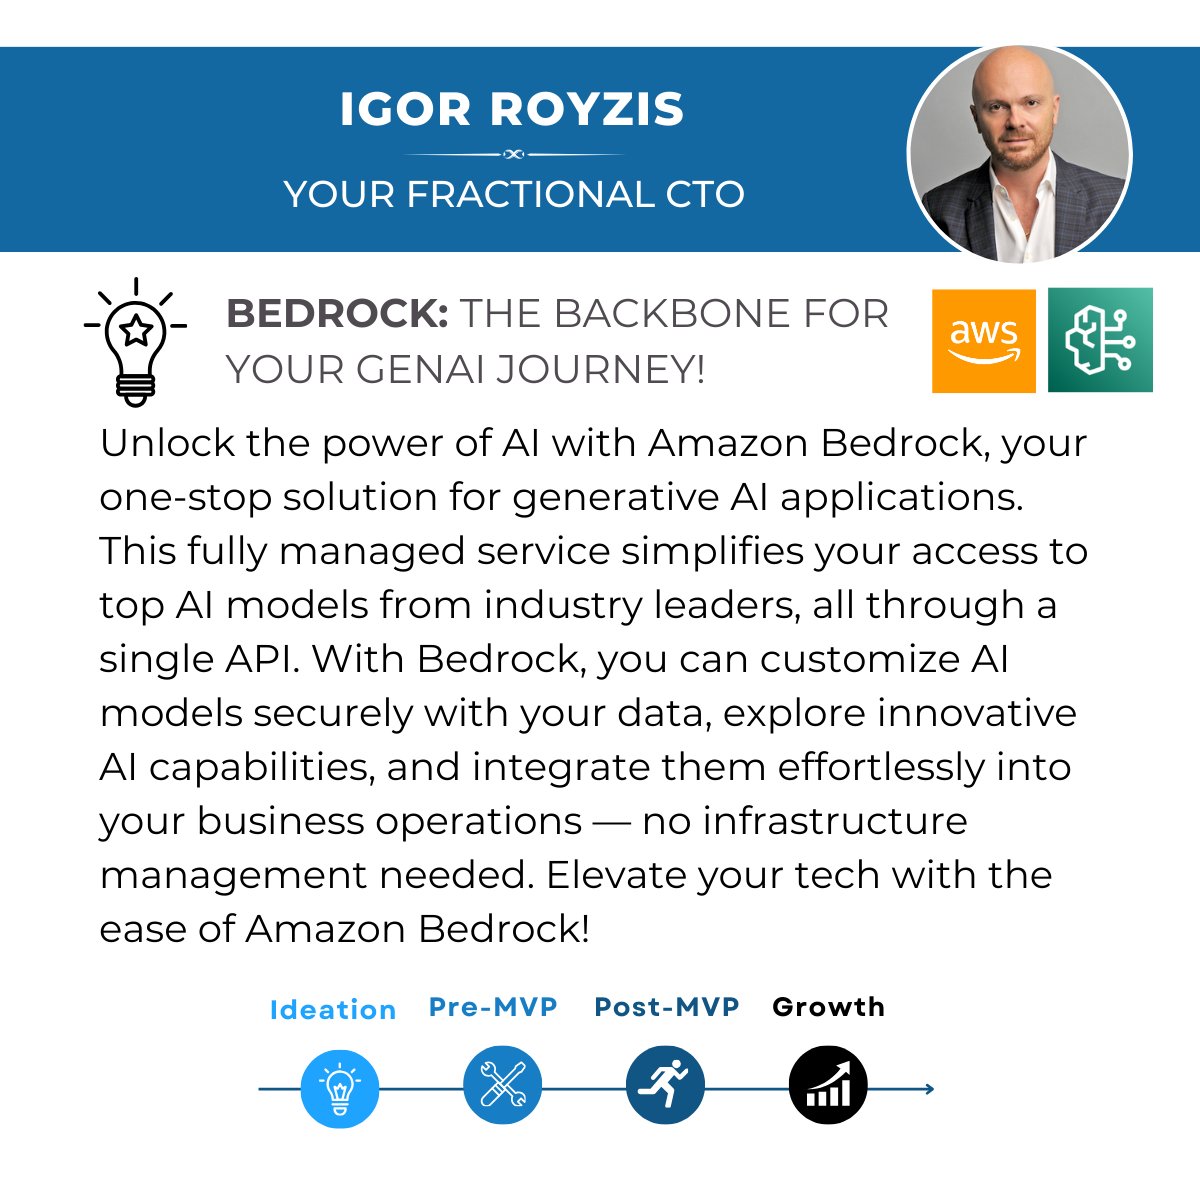 Amazon Bedrock: The Backbone for Your GenAI Journey!

Schedule your free consultation with me by clicking the link below!
calendly.com/iroyzis/30min

#FractionalCTO #Startups, #Technology, #CTO, #TechLeadership, #StartupGrowth #AmazonBedrock #GENAI #LLM